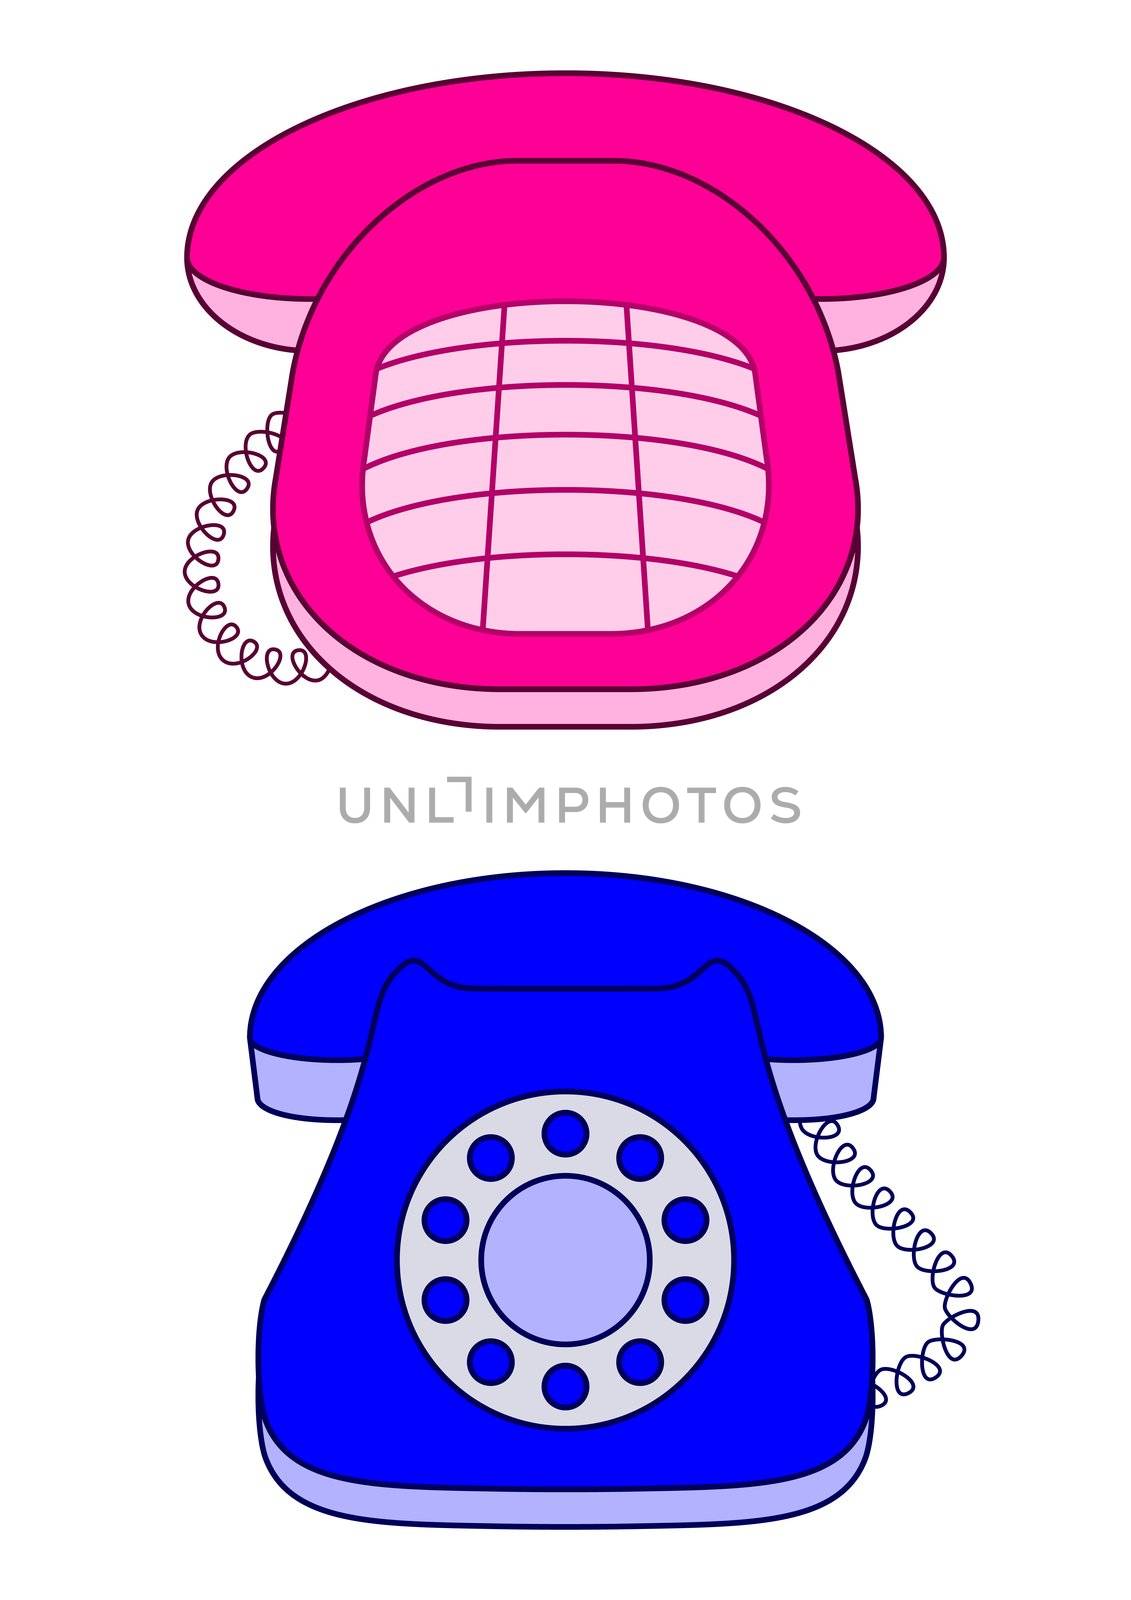 Phone vintage desktop: push-button and dial, pink and blue, isolated on white background